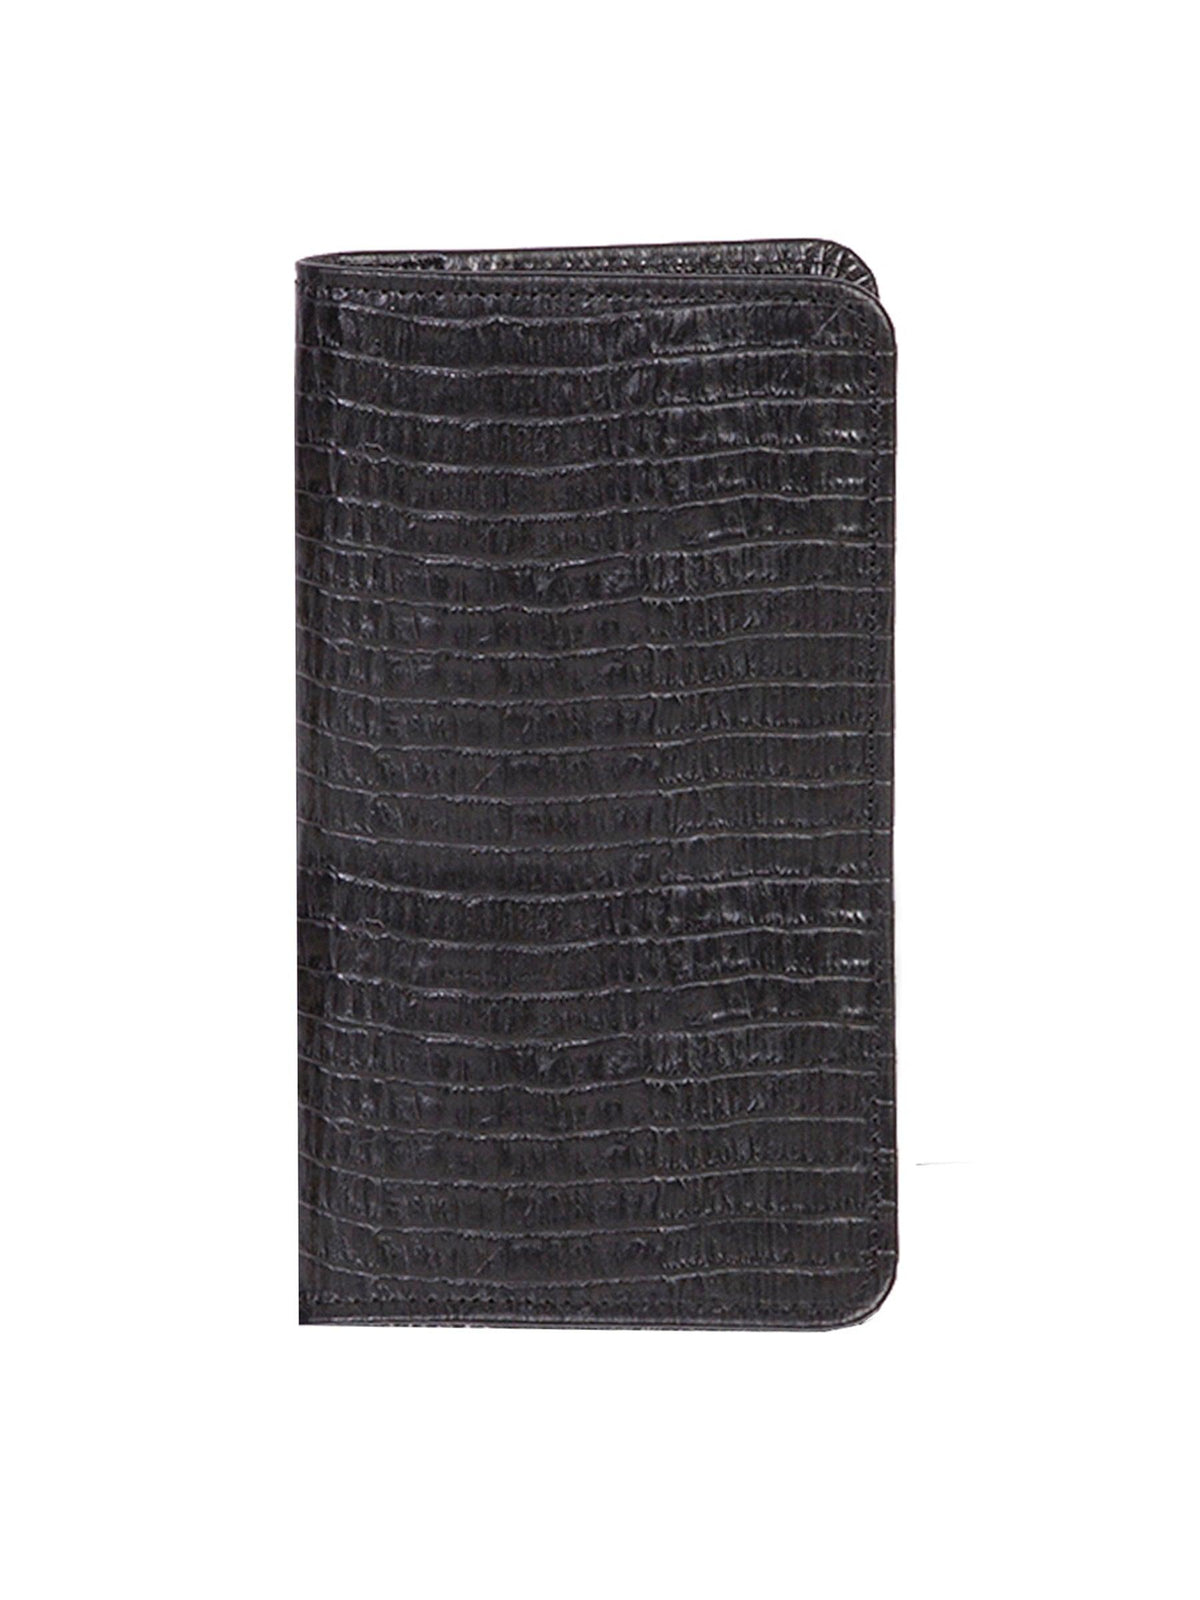 Scully Leather Black Lizard Leather Ruled Pocket Notebook - Flyclothing LLC